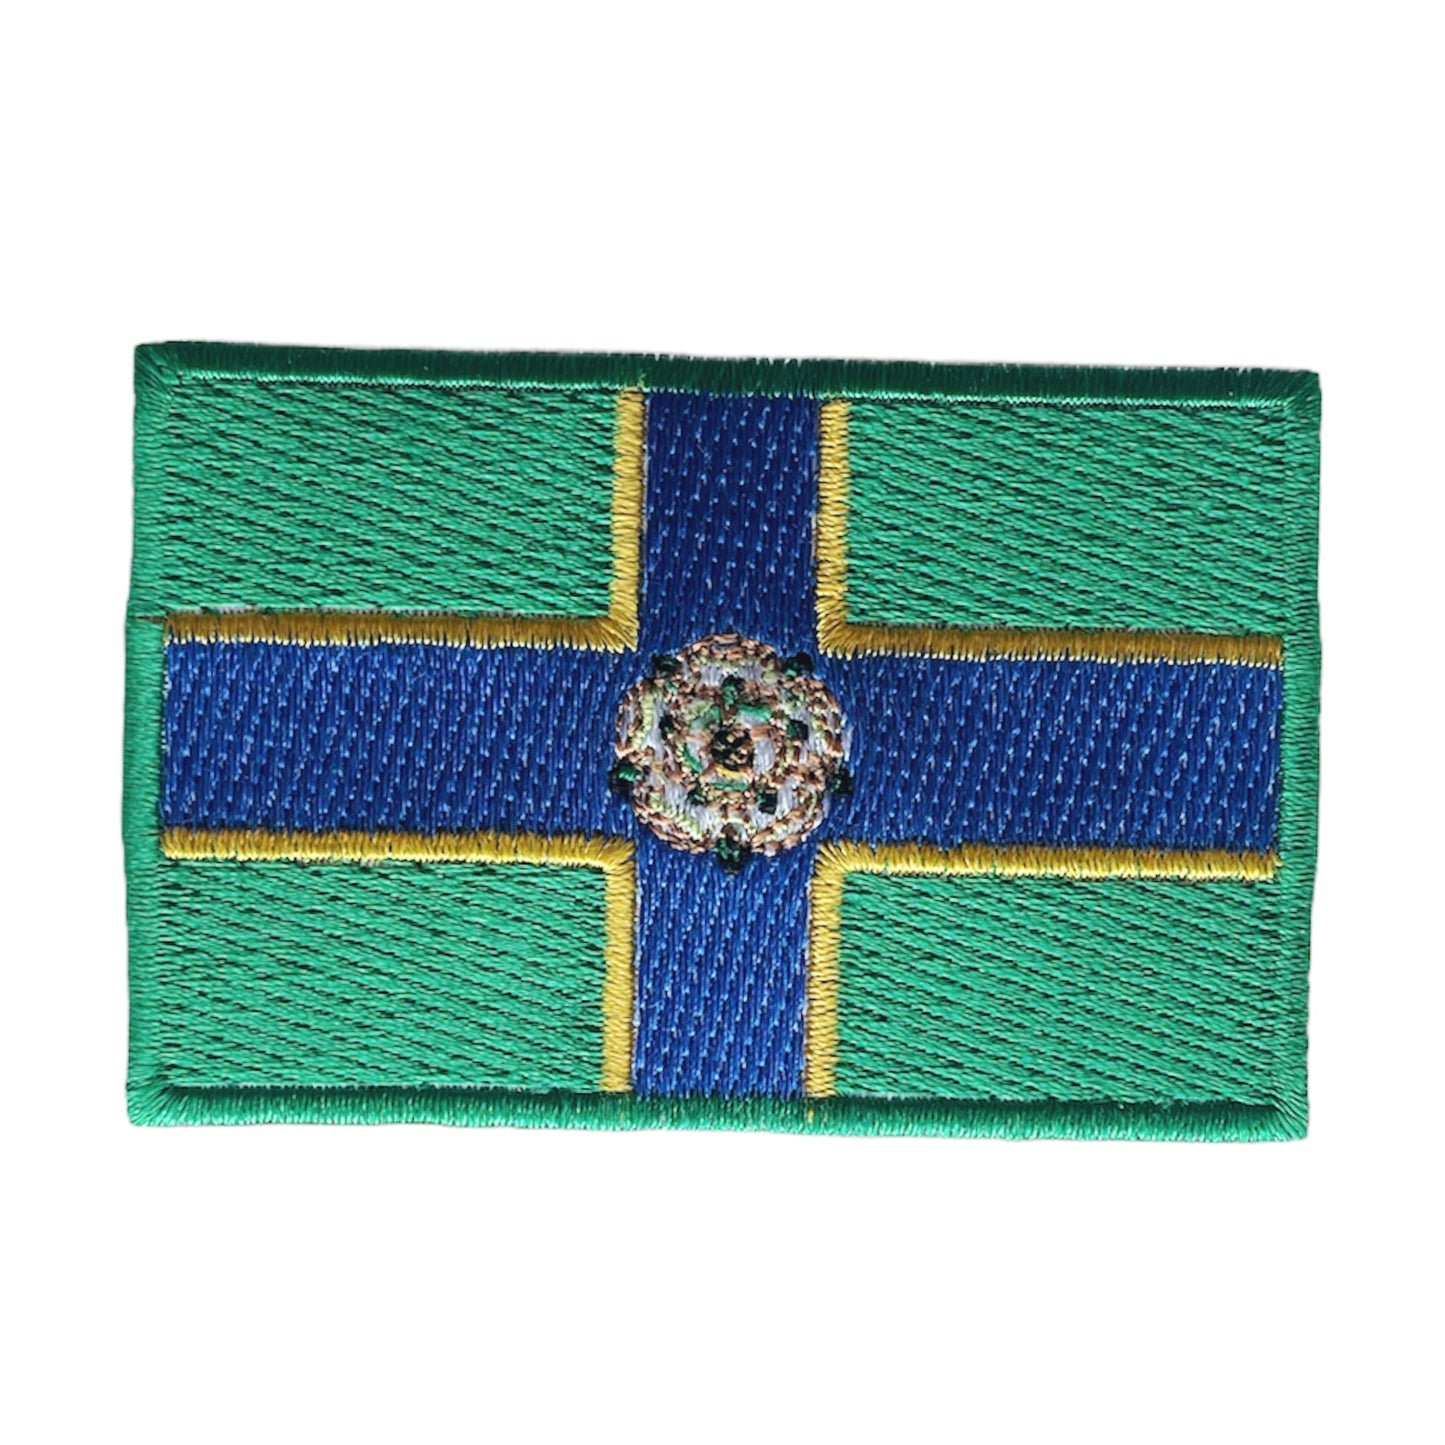 North Riding of Yorkshire Flag Patch - The Great Yorkshire Shop